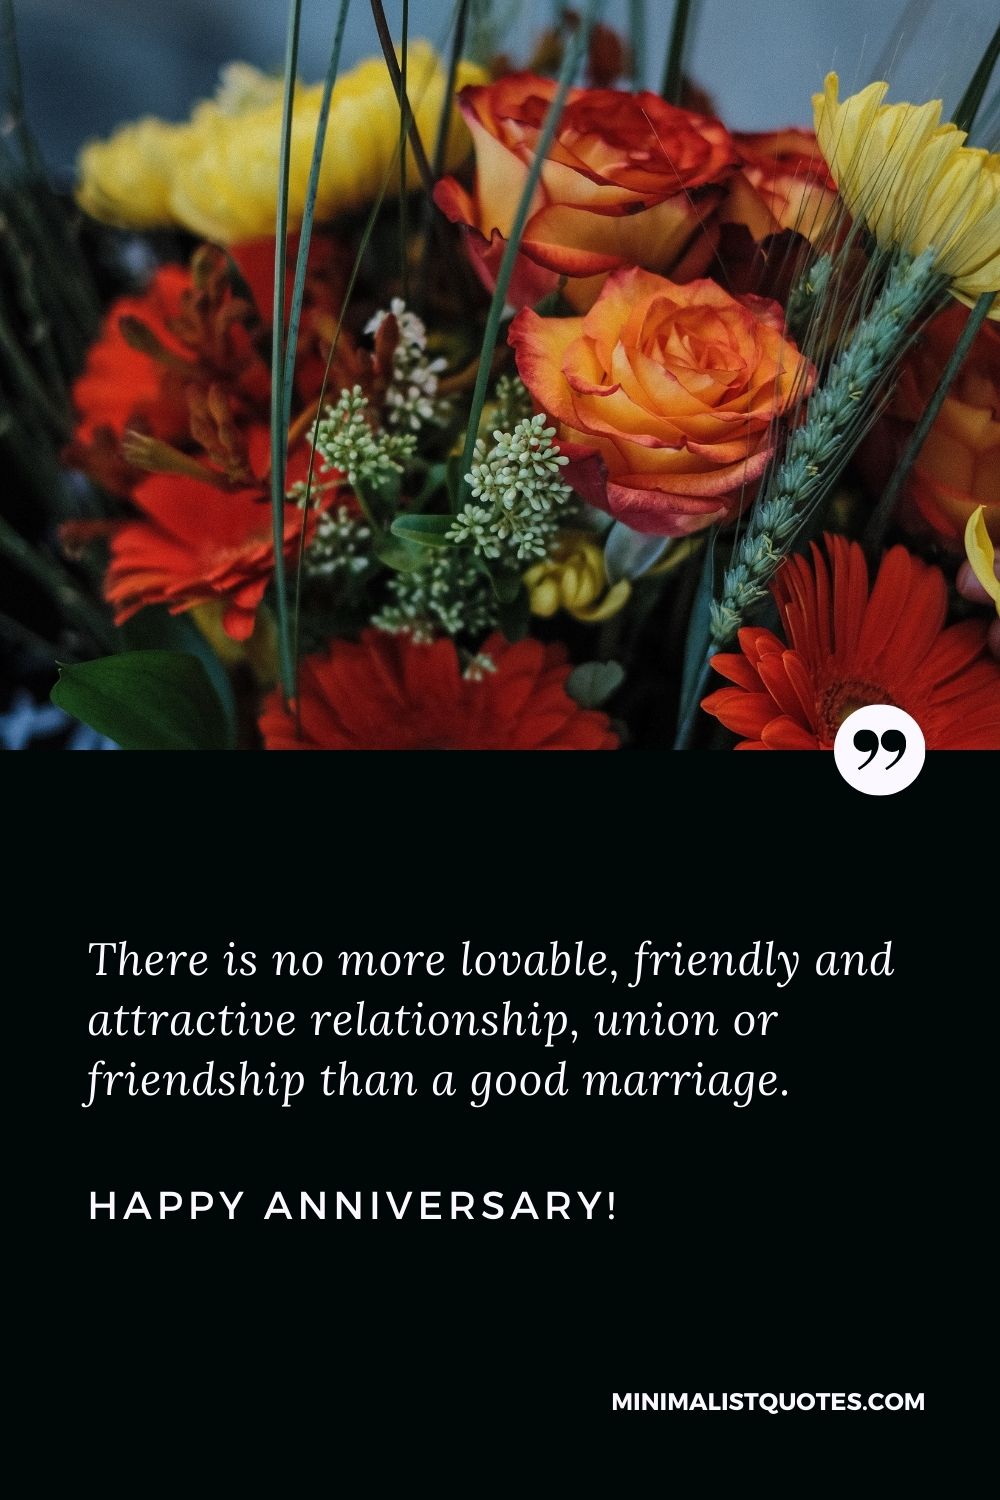 Wedding anniversary message: There is no more lovable, friendly and attractive relationship, union or friendship than a good marriage. Happy Anniversary!